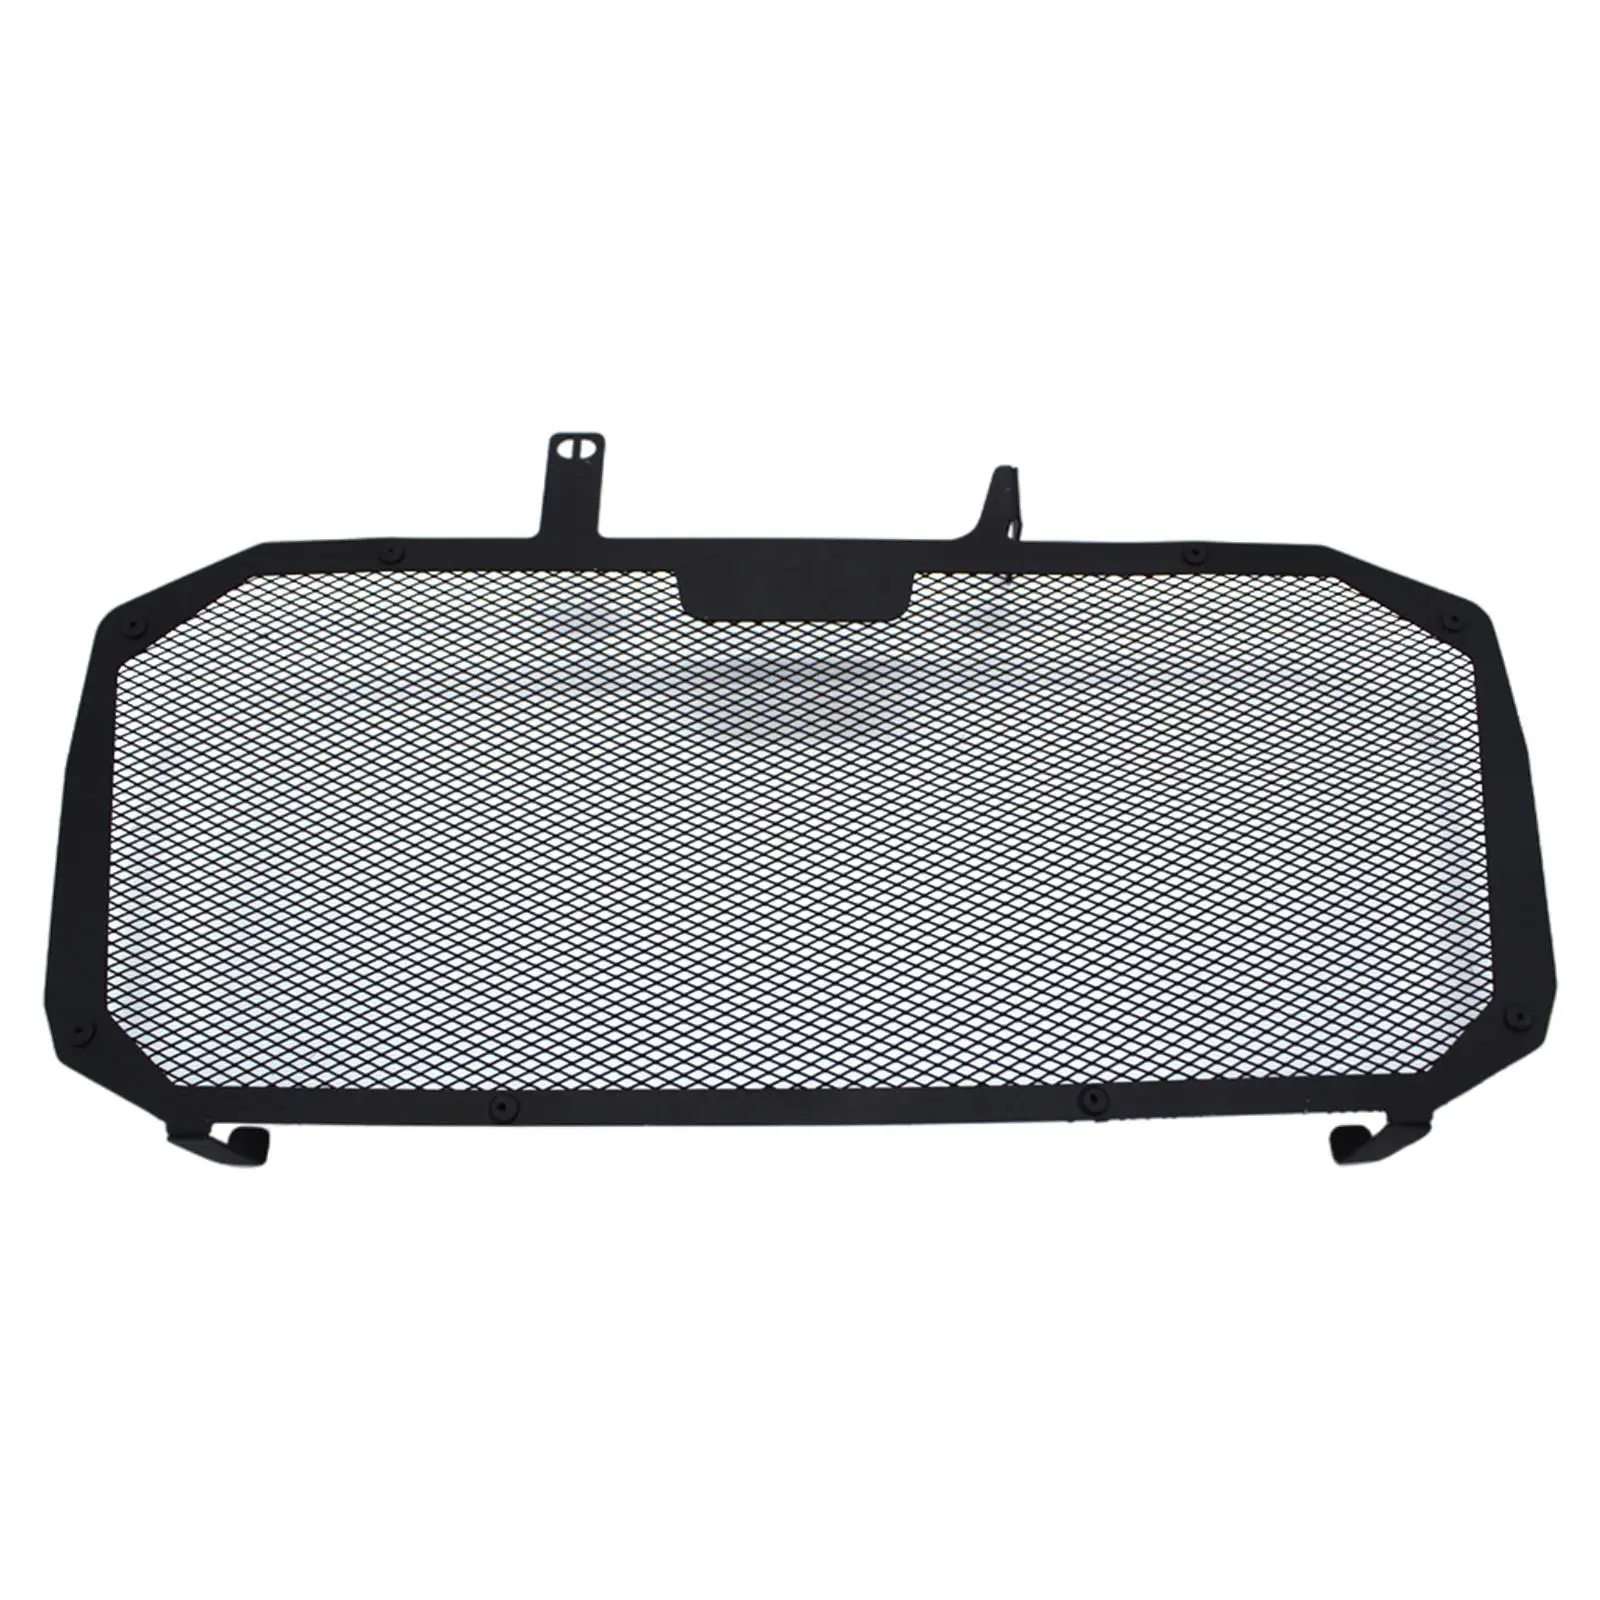 Water Grille Cover for  NSS750 50 2020 2021, Durable